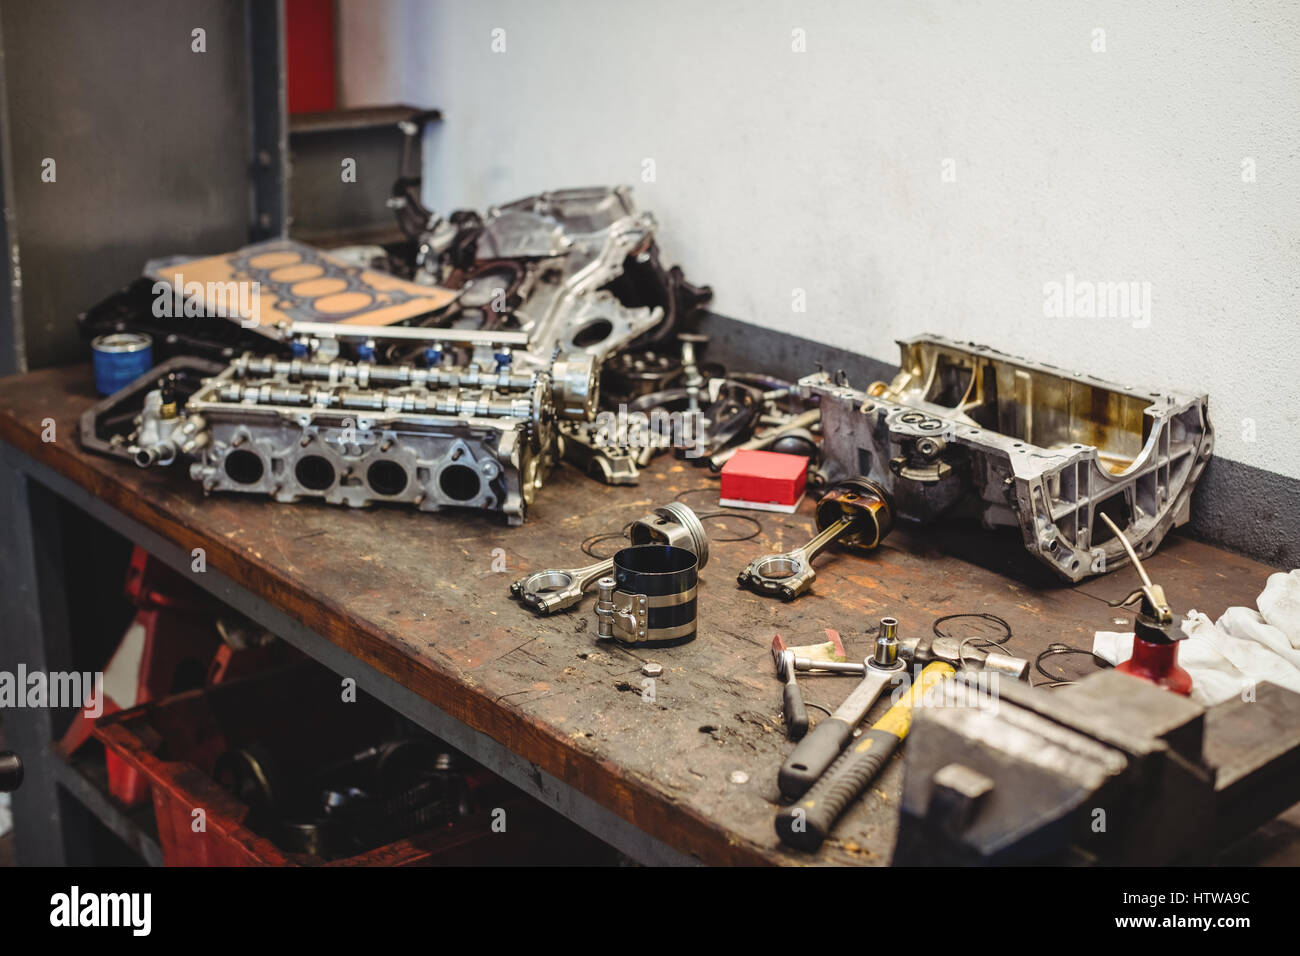 Workbench with car parts and tools Stock Photo